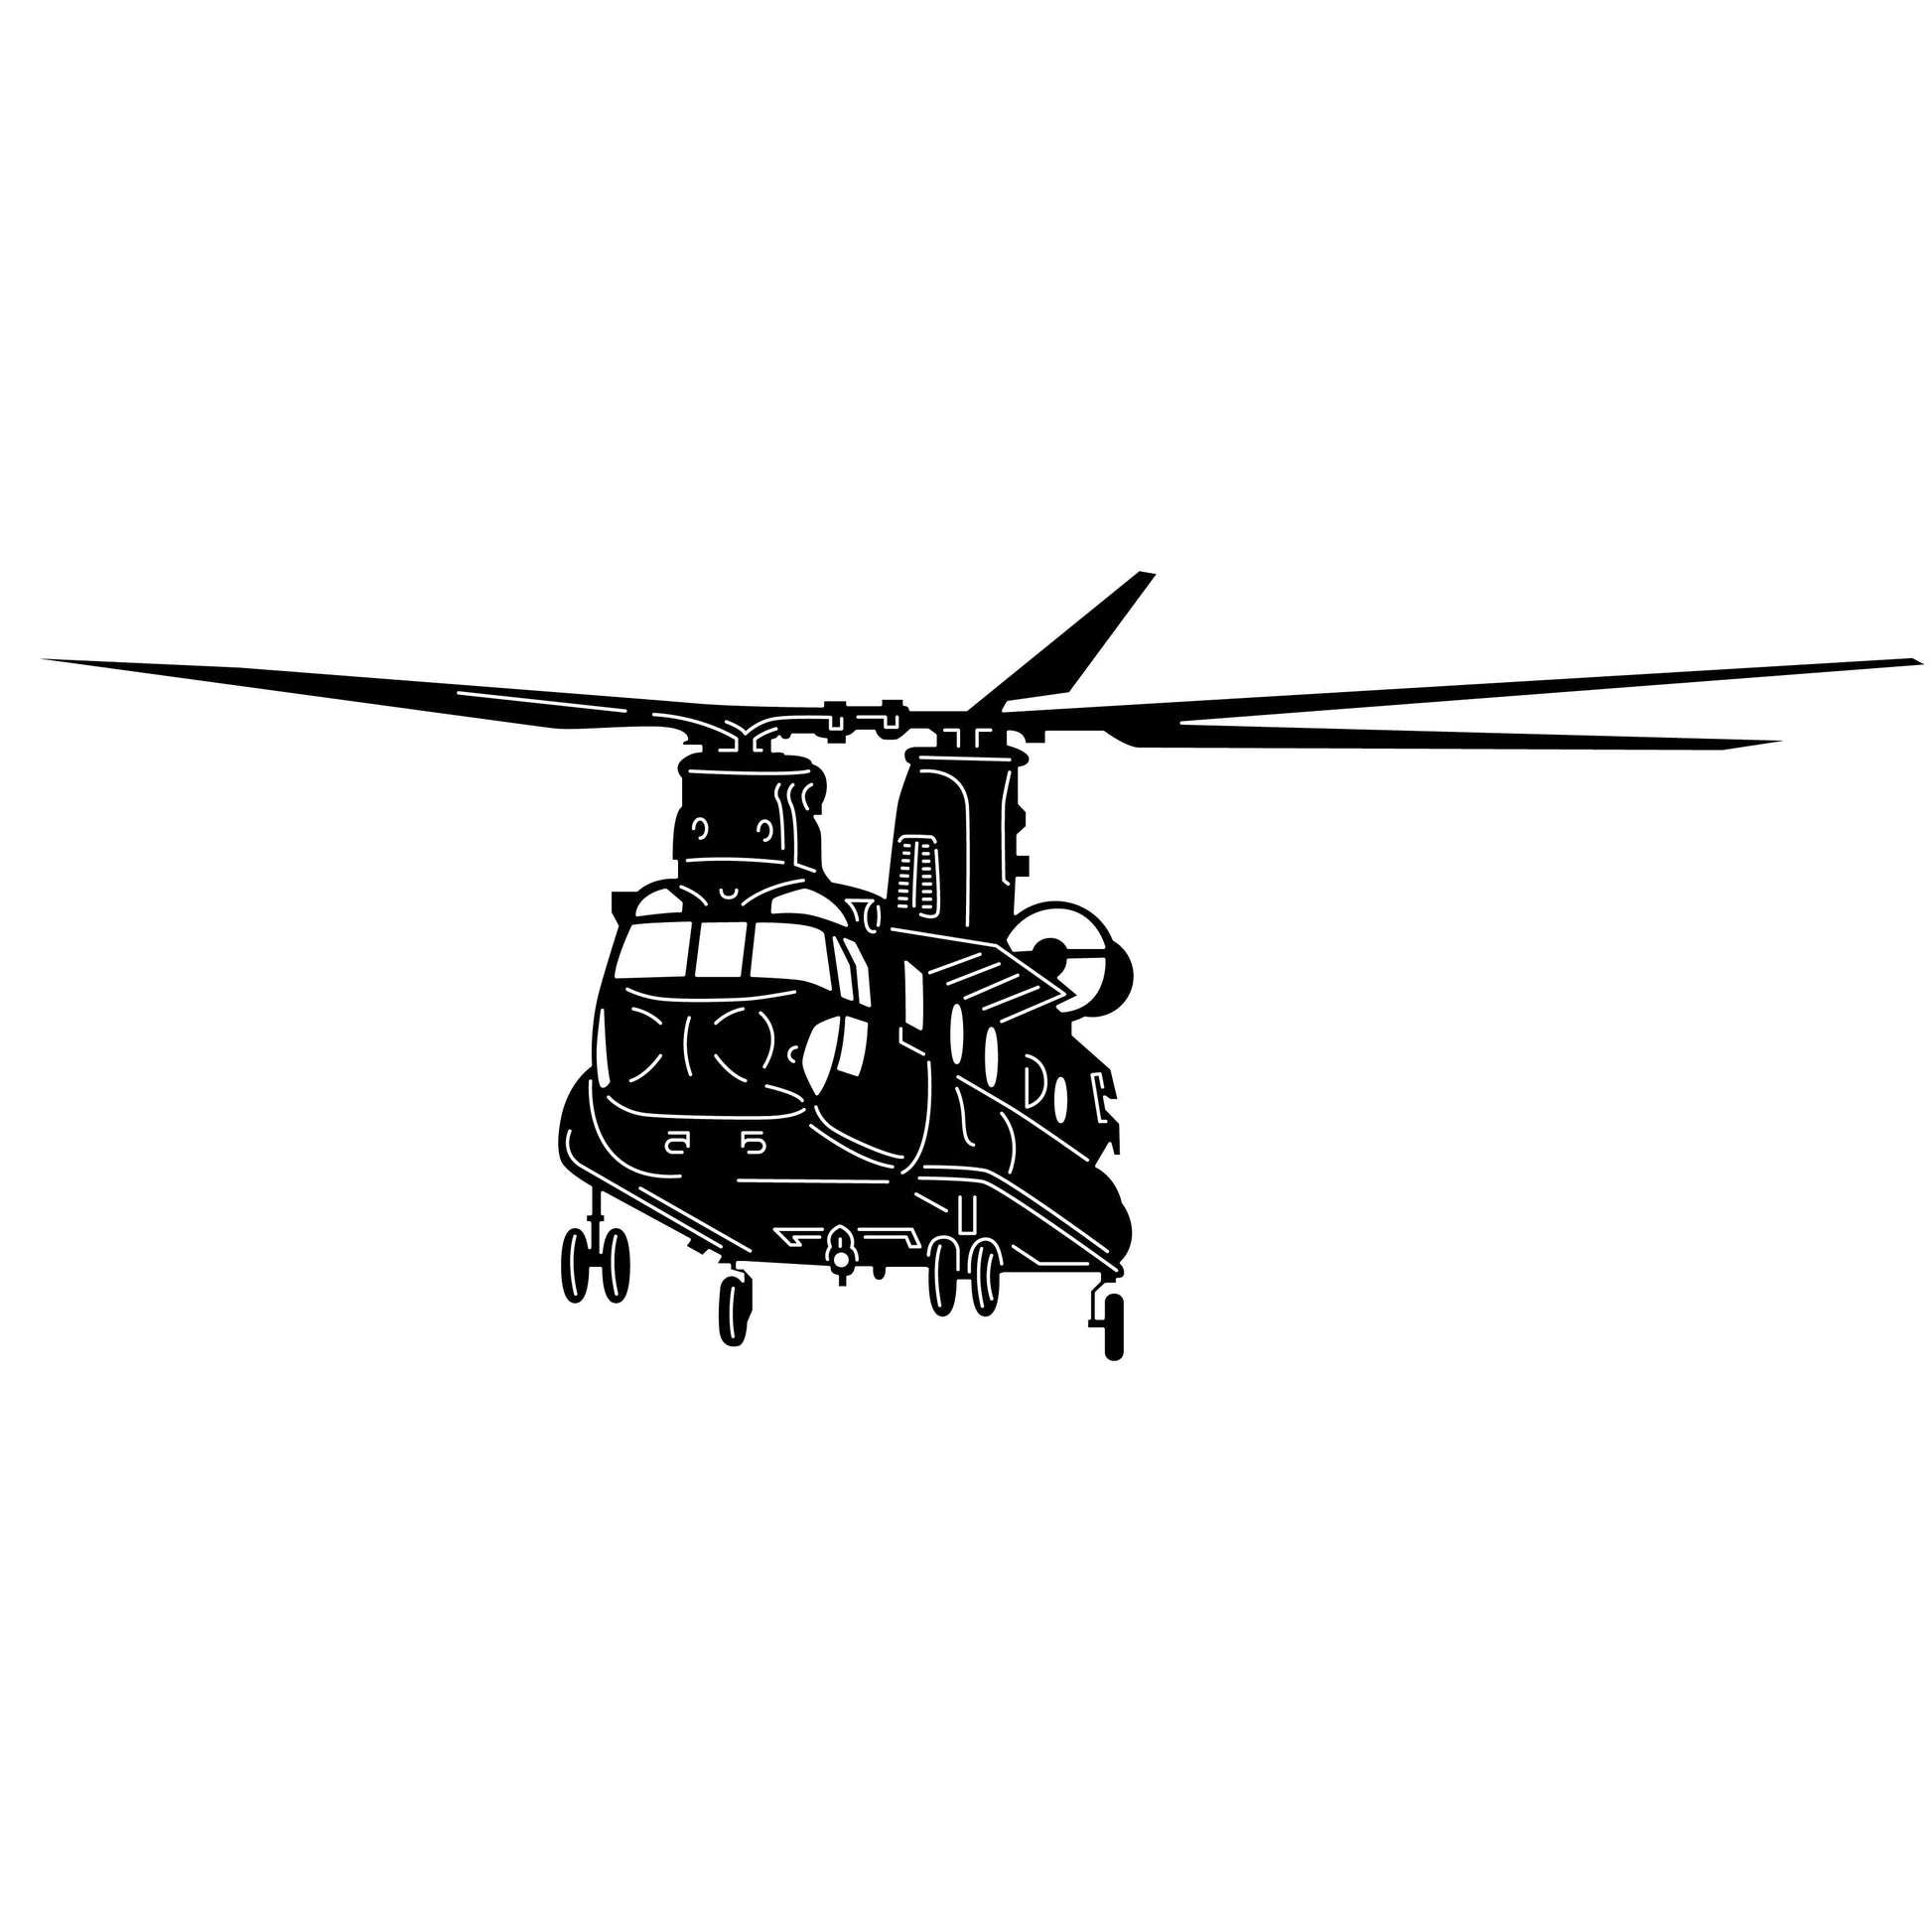 Military Aircraft Helicopter Boeing CH-47 Chinook American heavy-lift twin-engine